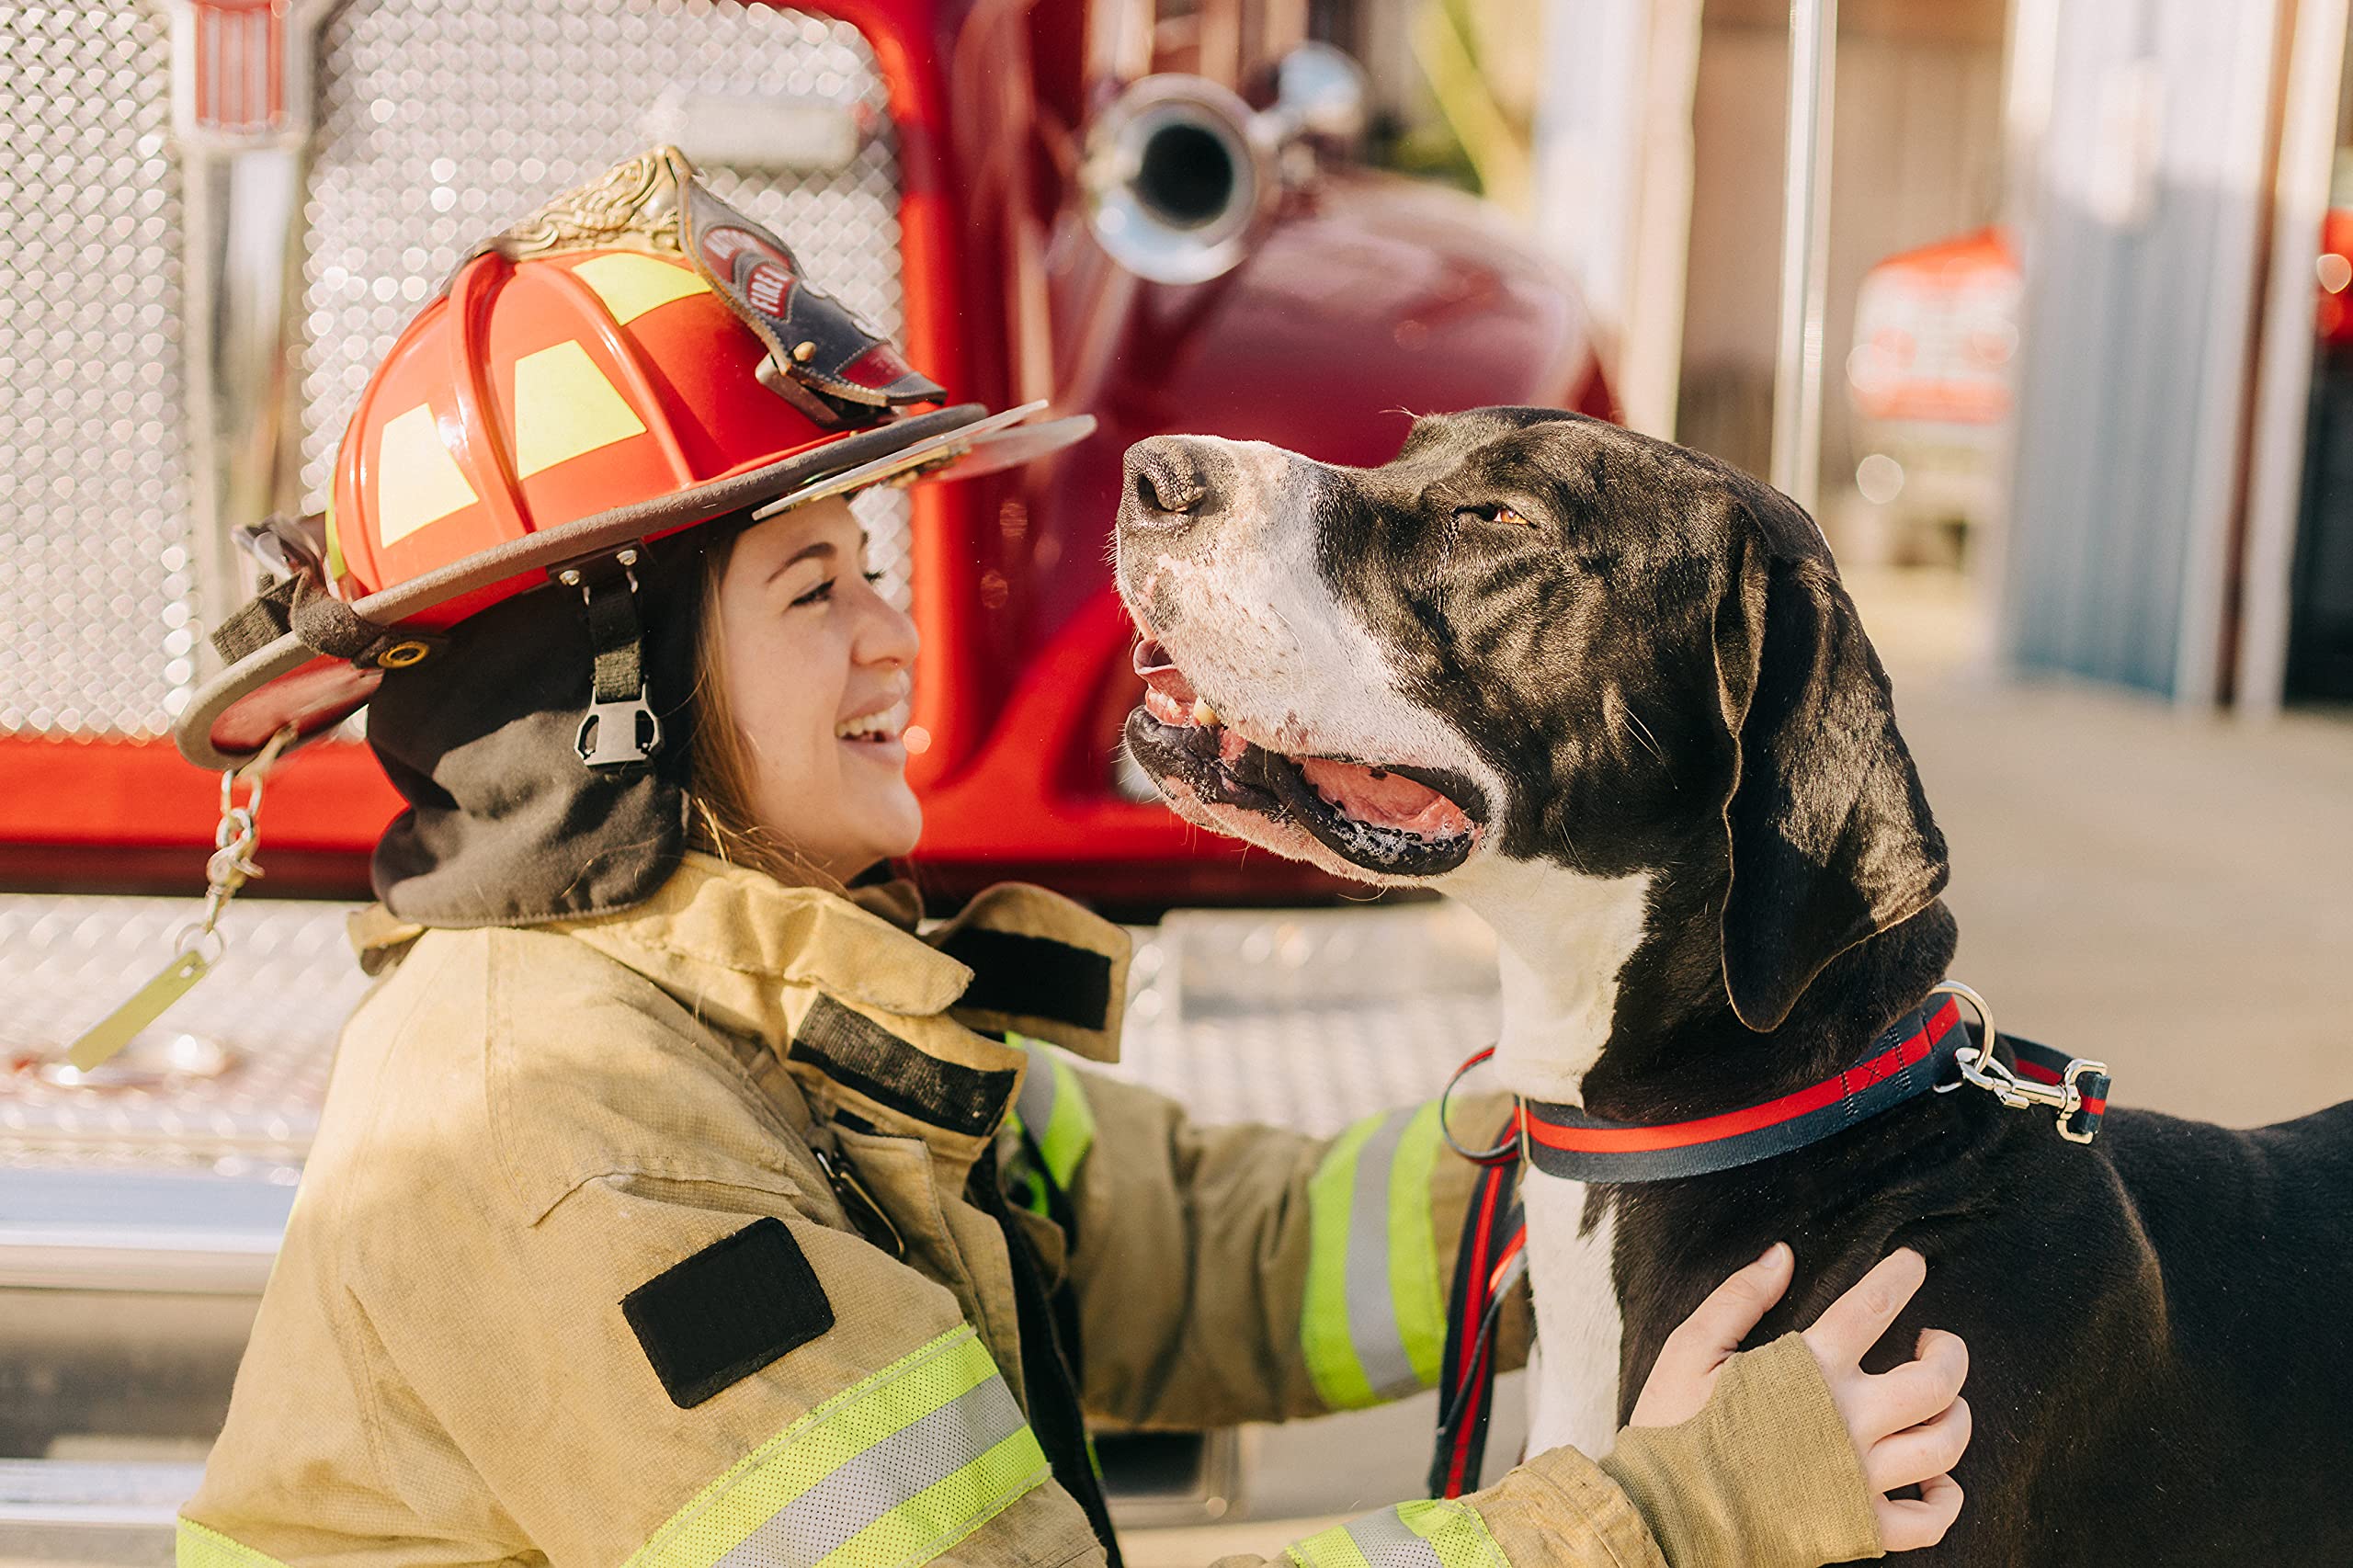 An image of a smiling firefighter while holding a dog